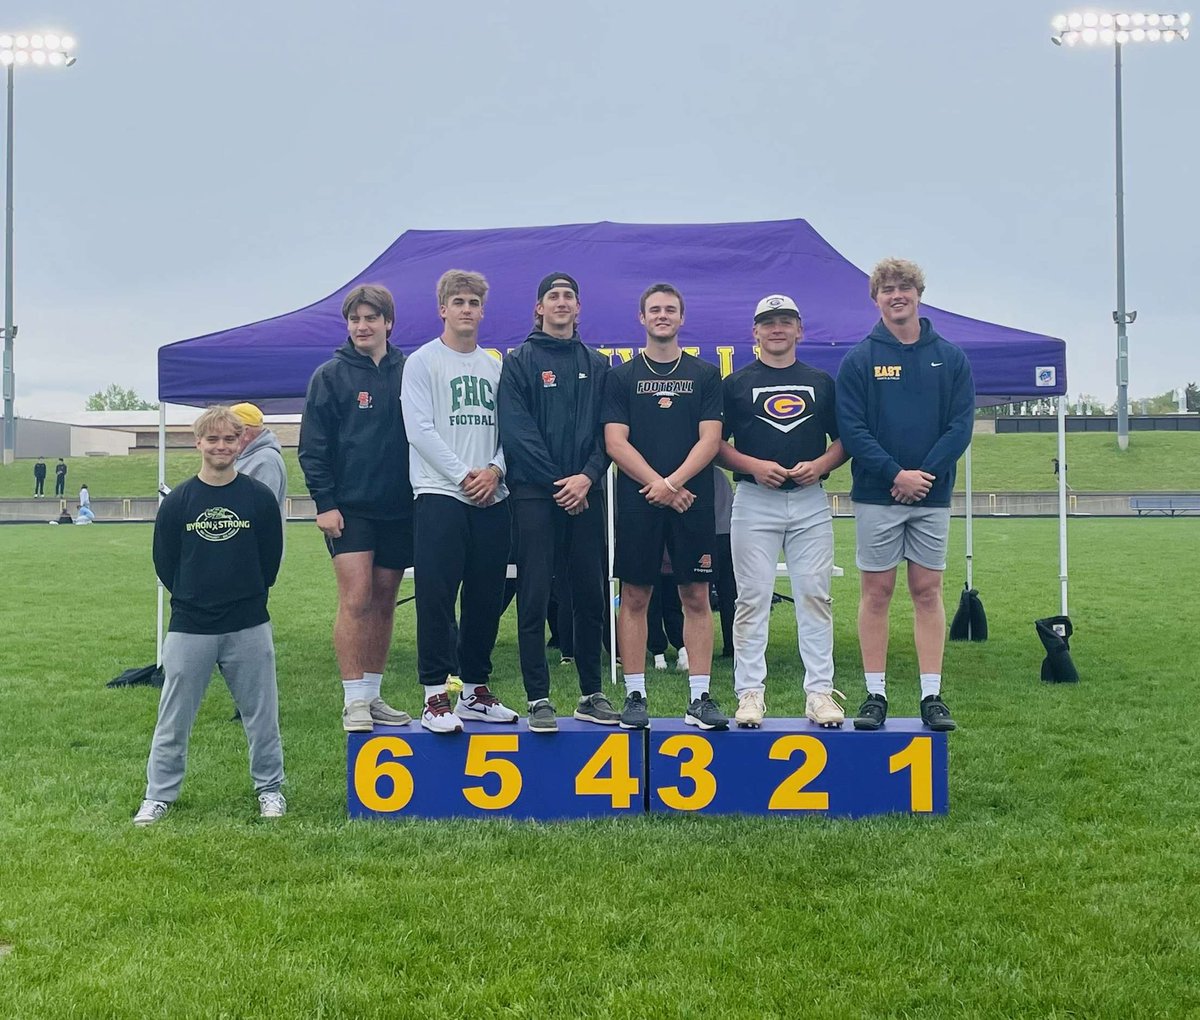 All Conference OK WHITE
Runner up discus-159’9
Broke the school record that’s been held since 1996! 
Runner up shot put-49’3
#dualsport #2025 #WorkNeverStops
@courtstrength